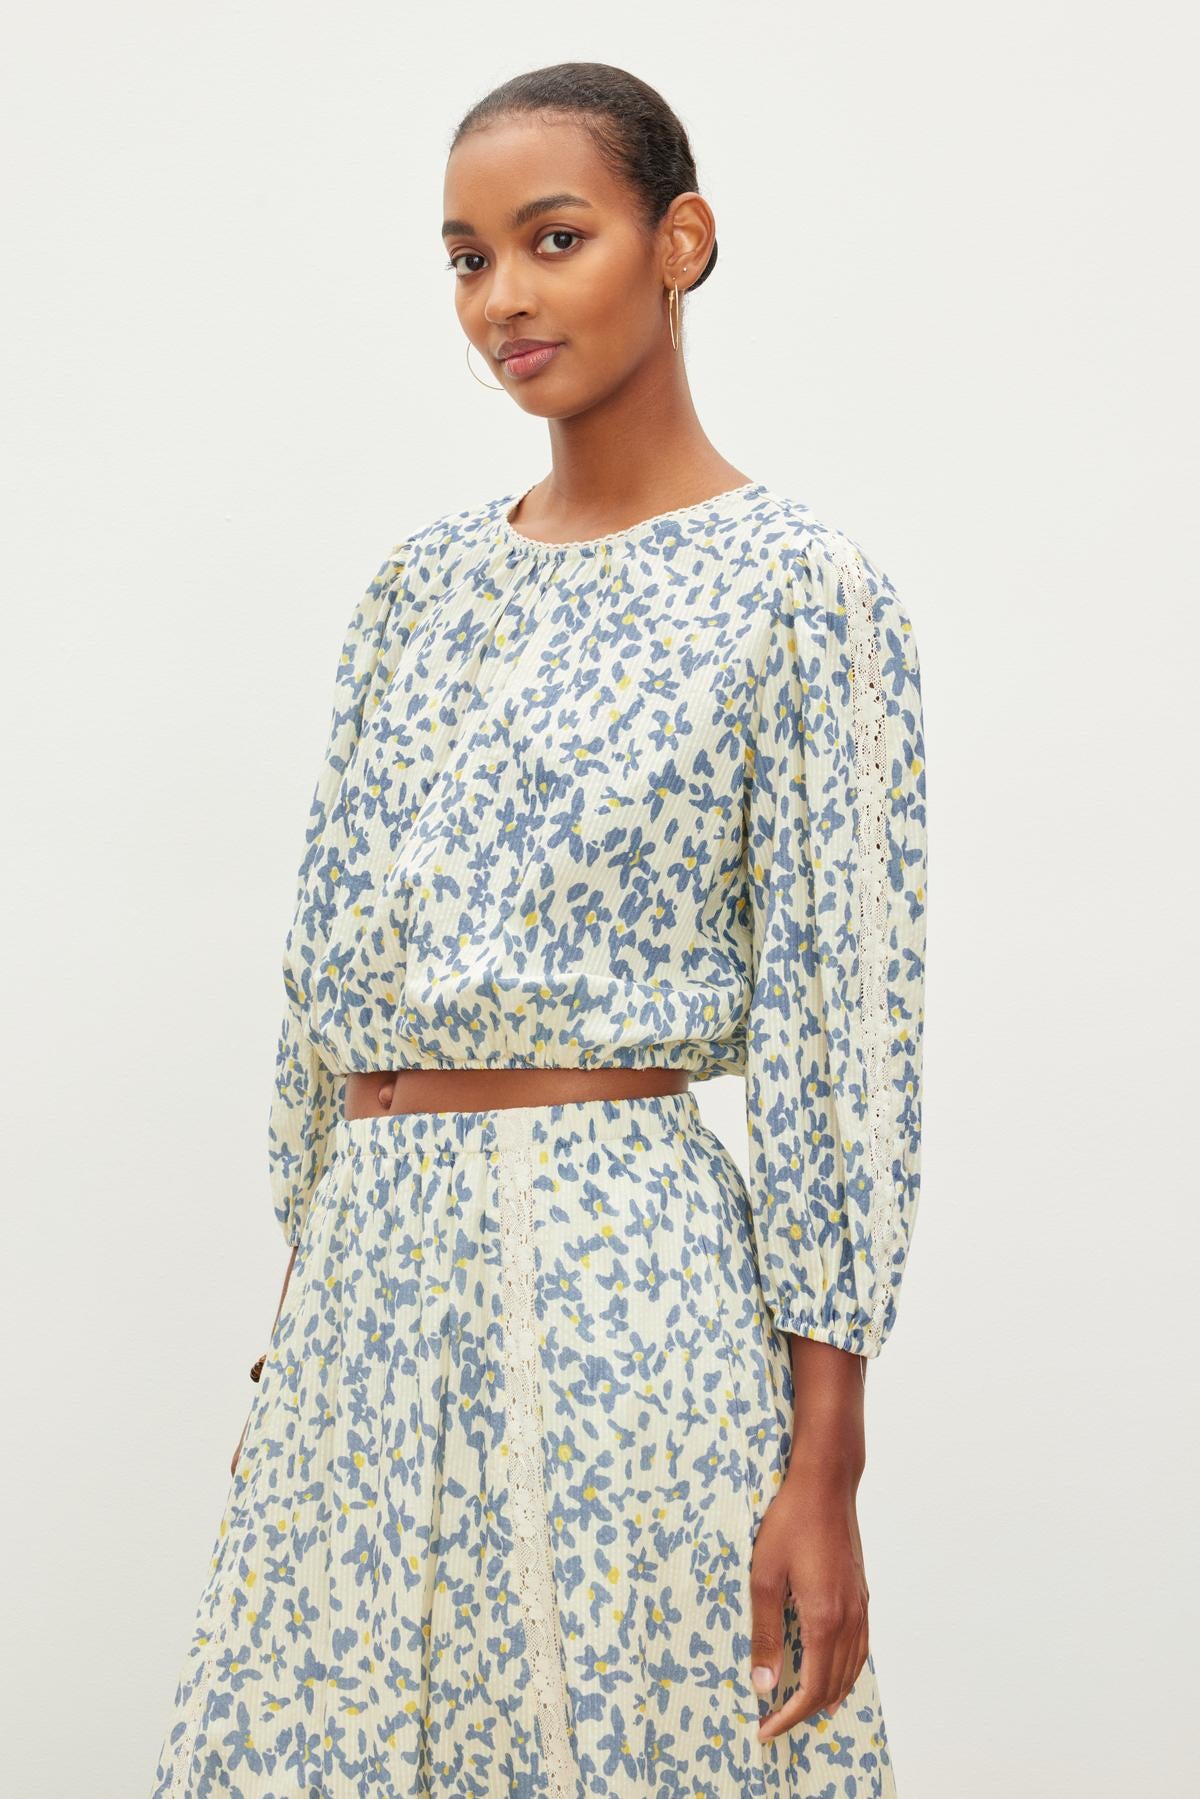 A person wearing a matching long-sleeved CAMERON TOP and skirt with a blue and yellow leaf pattern, standing against a plain white background, by Velvet by Graham & Spencer.-37073697767617